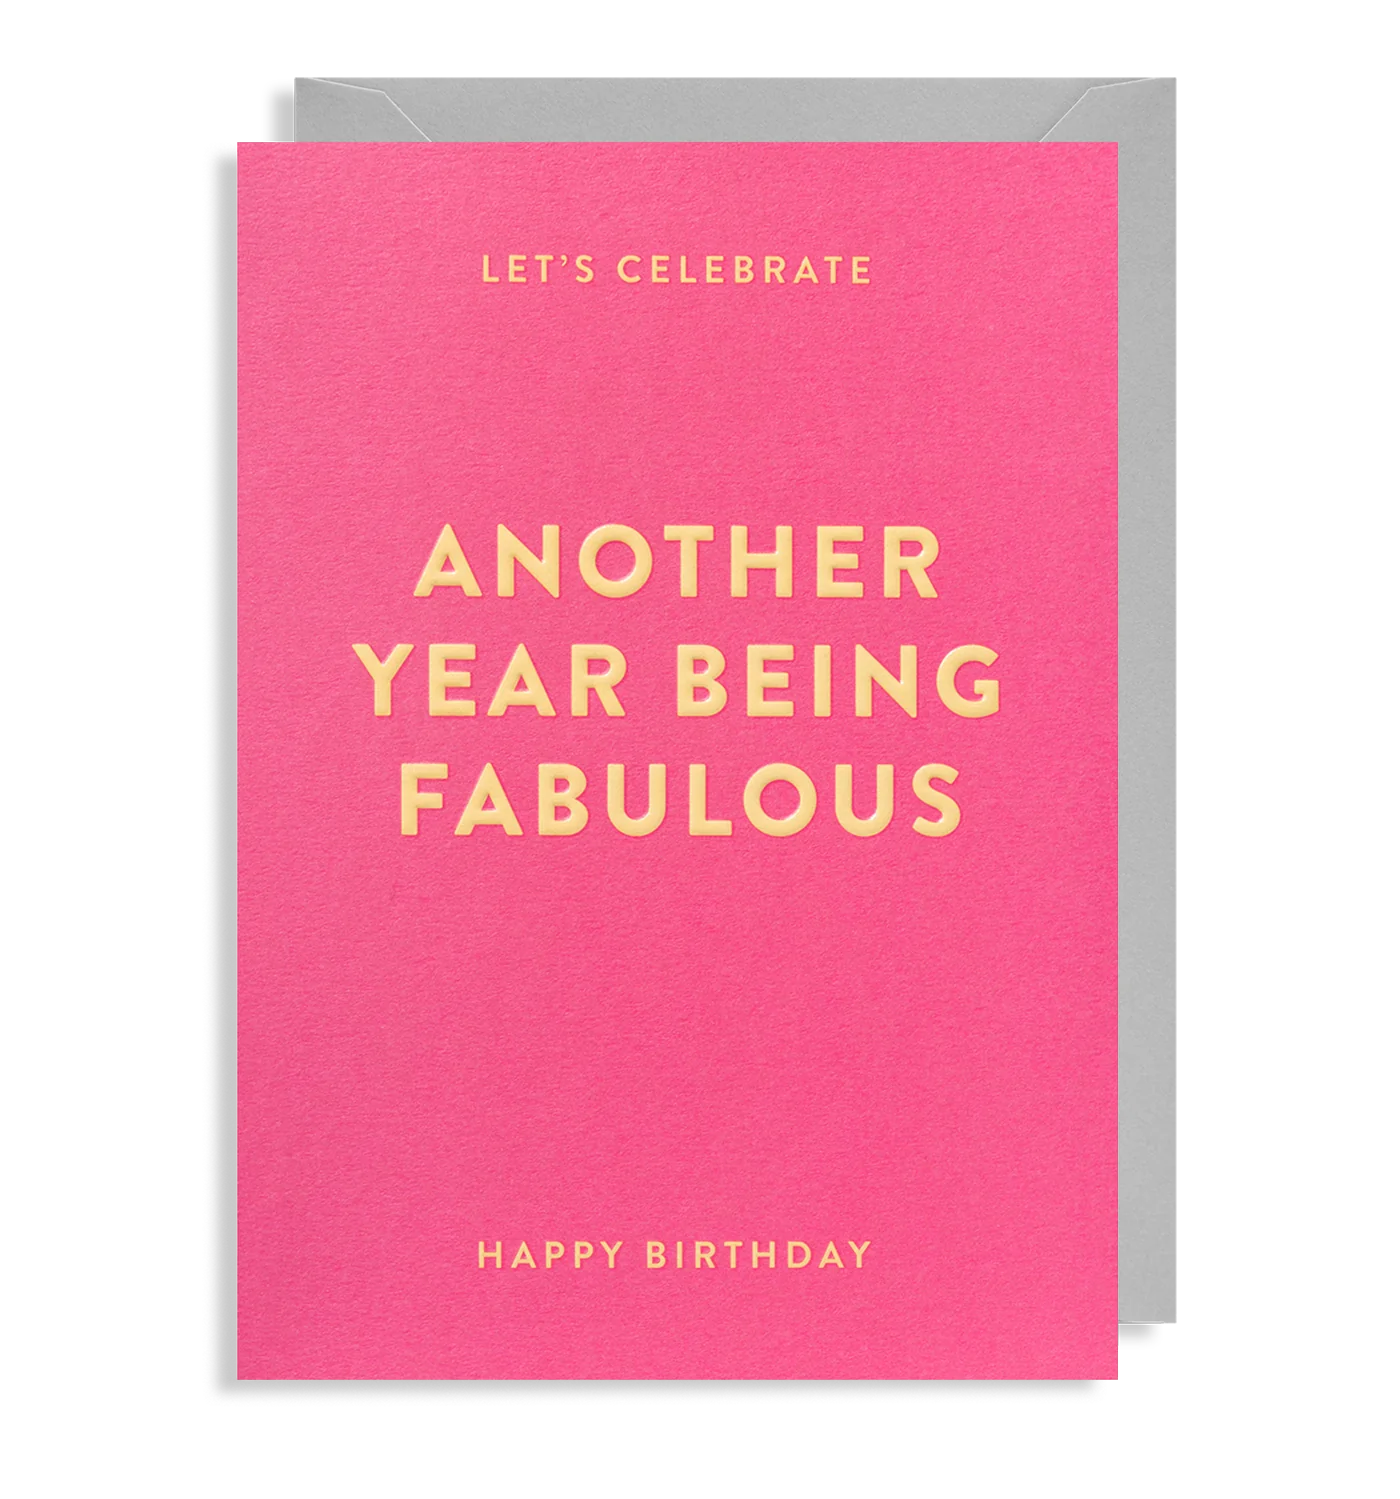 Let's Celebrate Another Year Being Fabulous Birthday Card